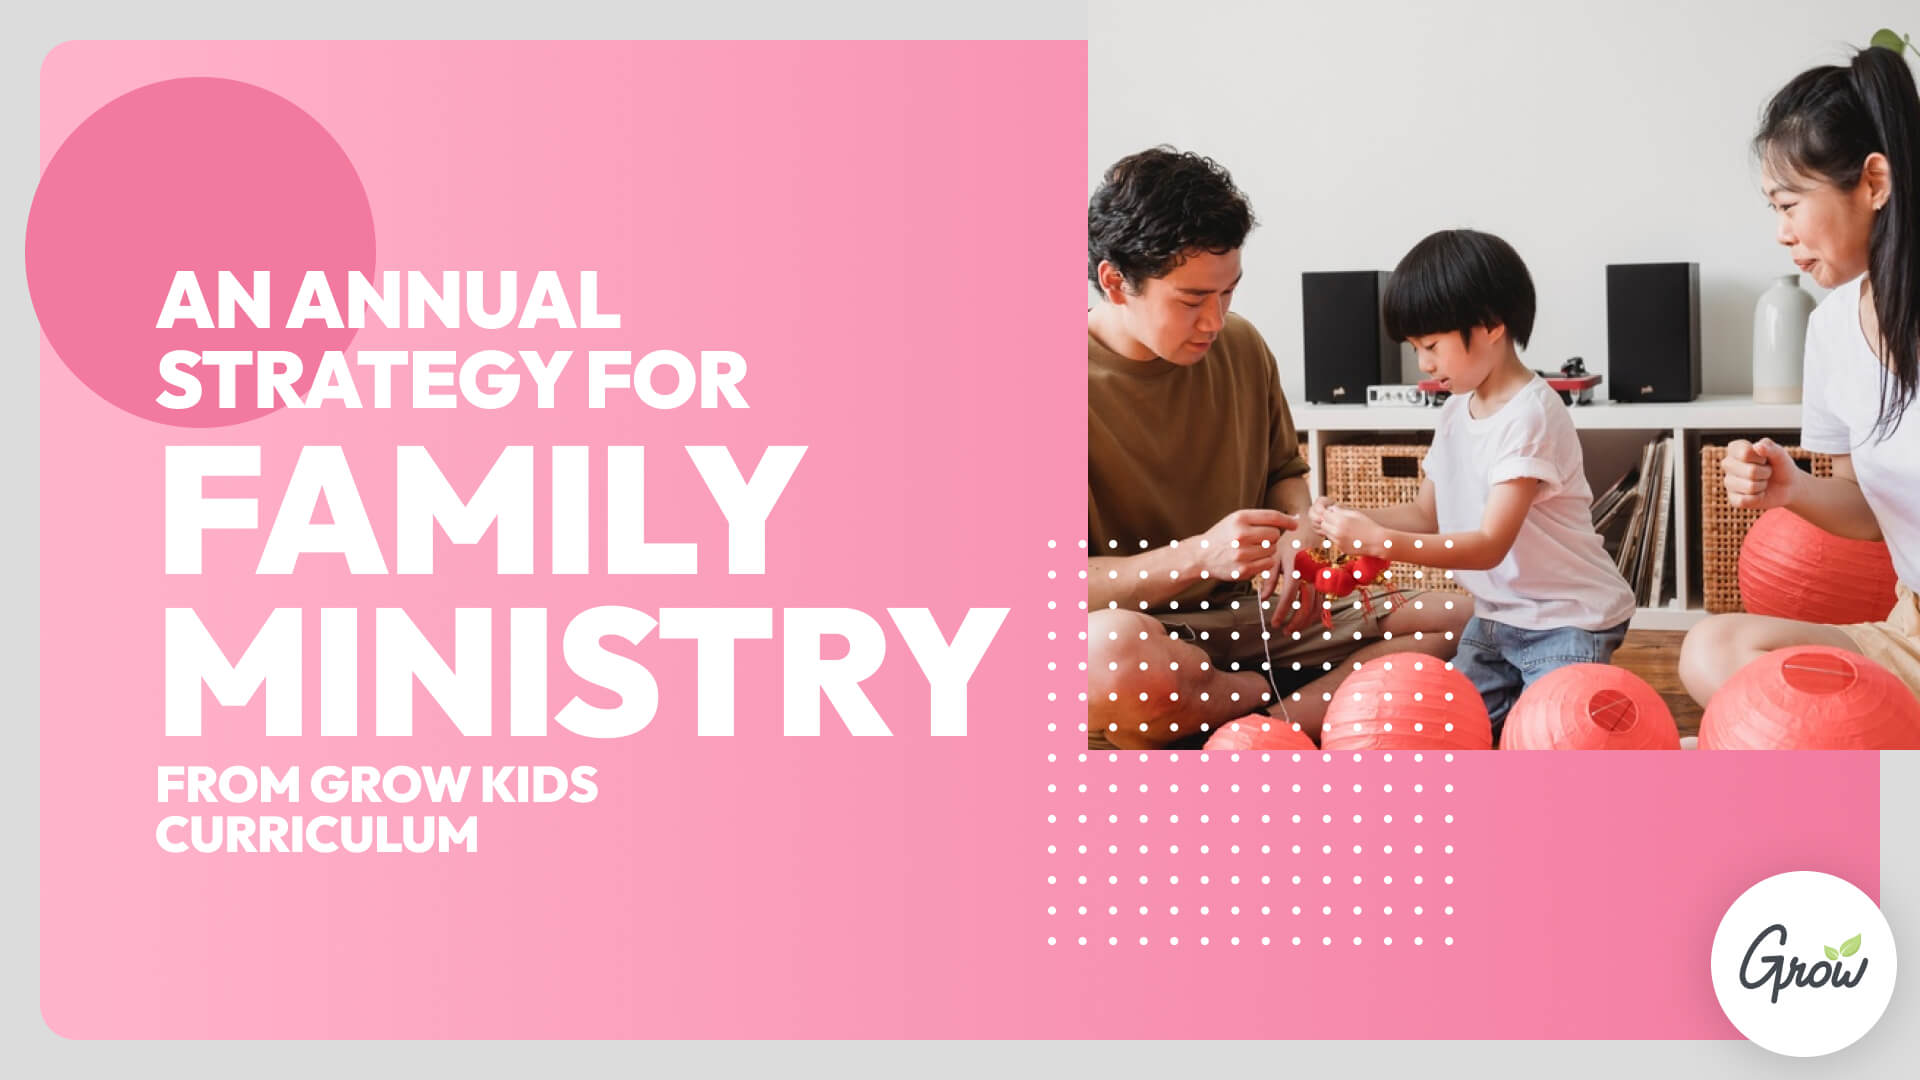 An Annual Strategy for Family Ministry from Grow Kids Curriculum